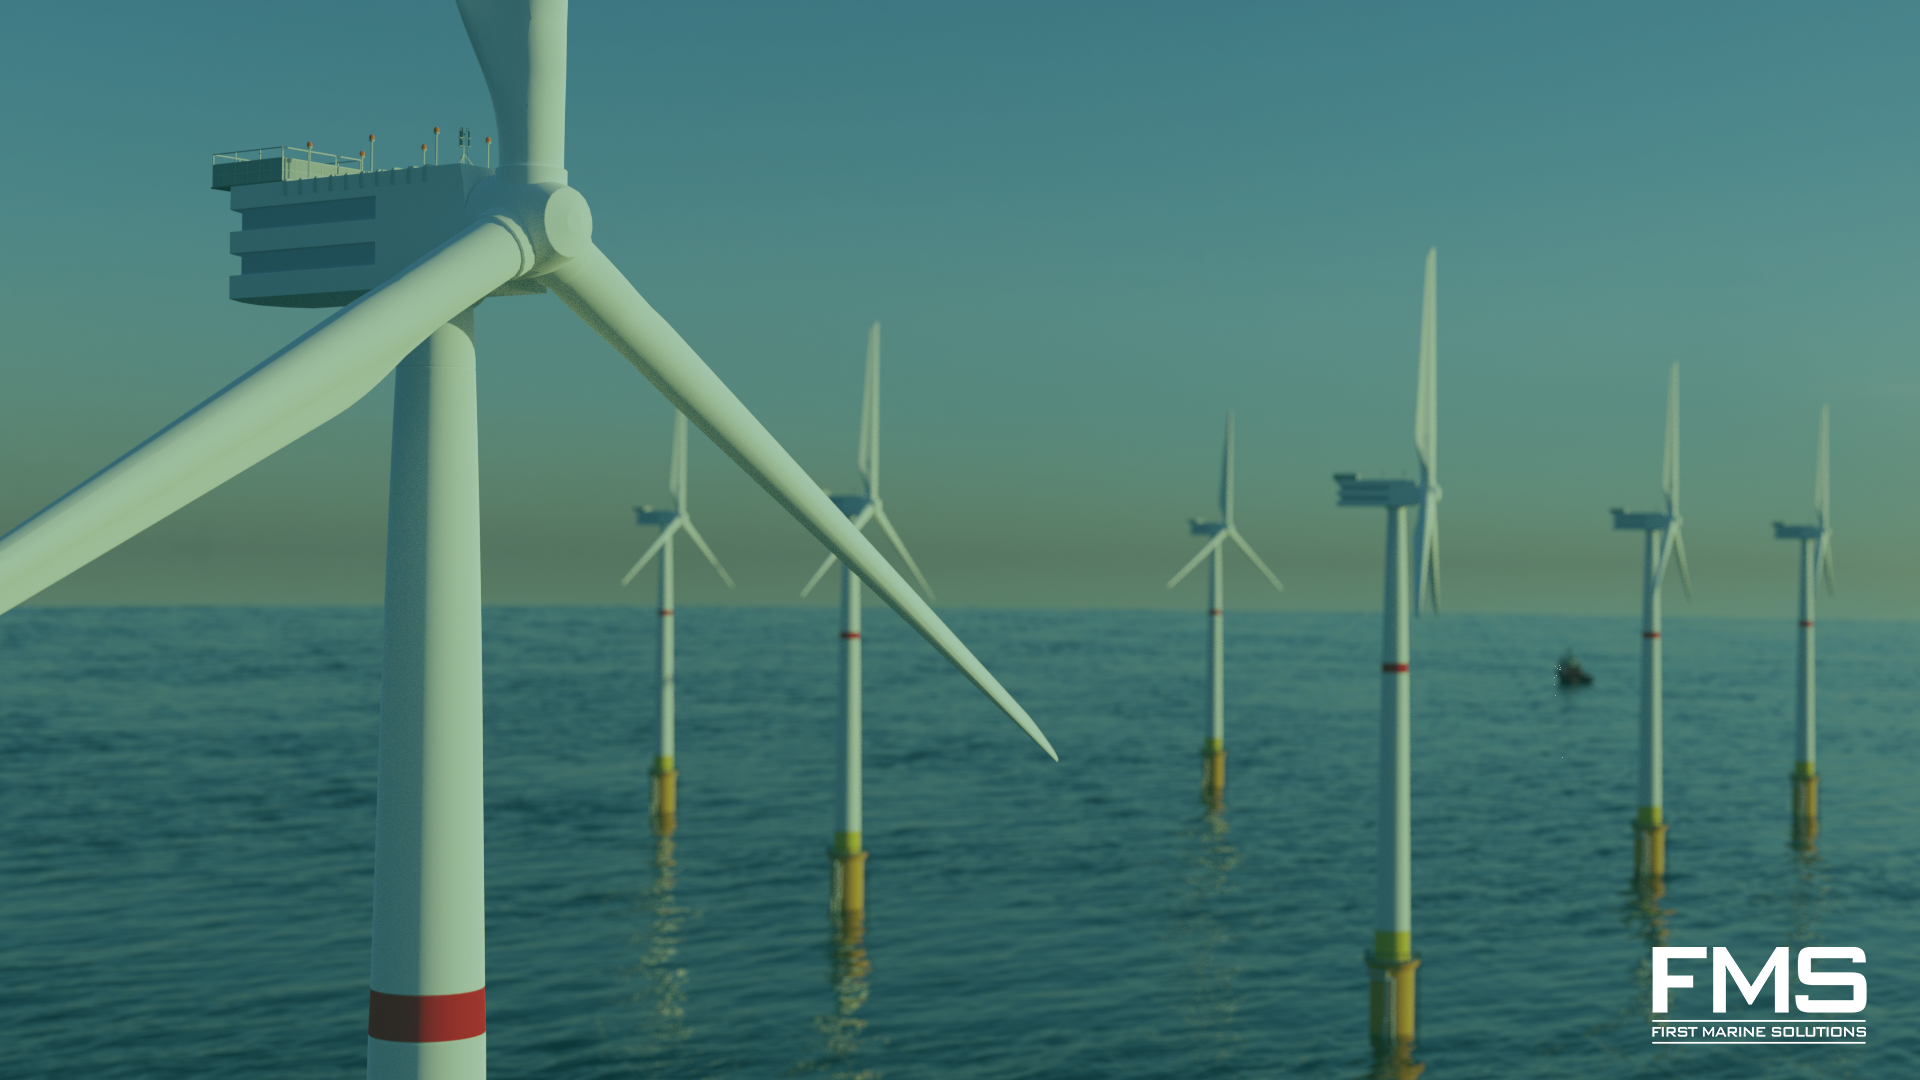 MEMBER NEWS: Posh partners with First Marine Solutions to explore floating offshore wind opportunities in Europe